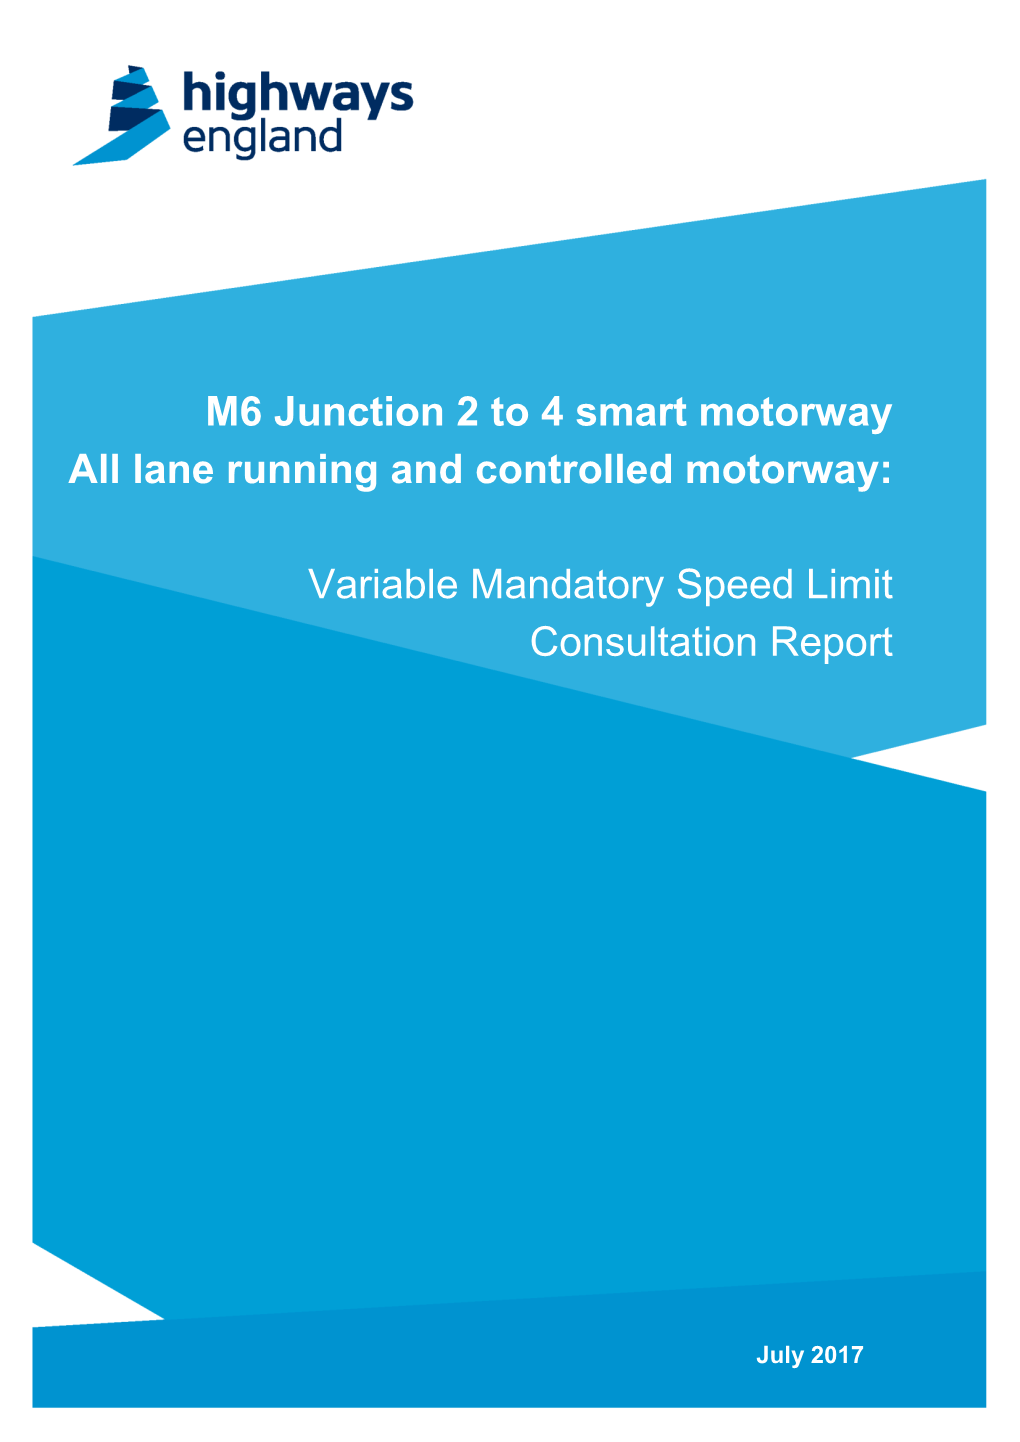 M6 Junction 2 to 4 Smart Motorway All Lane Running and Controlled Motorway